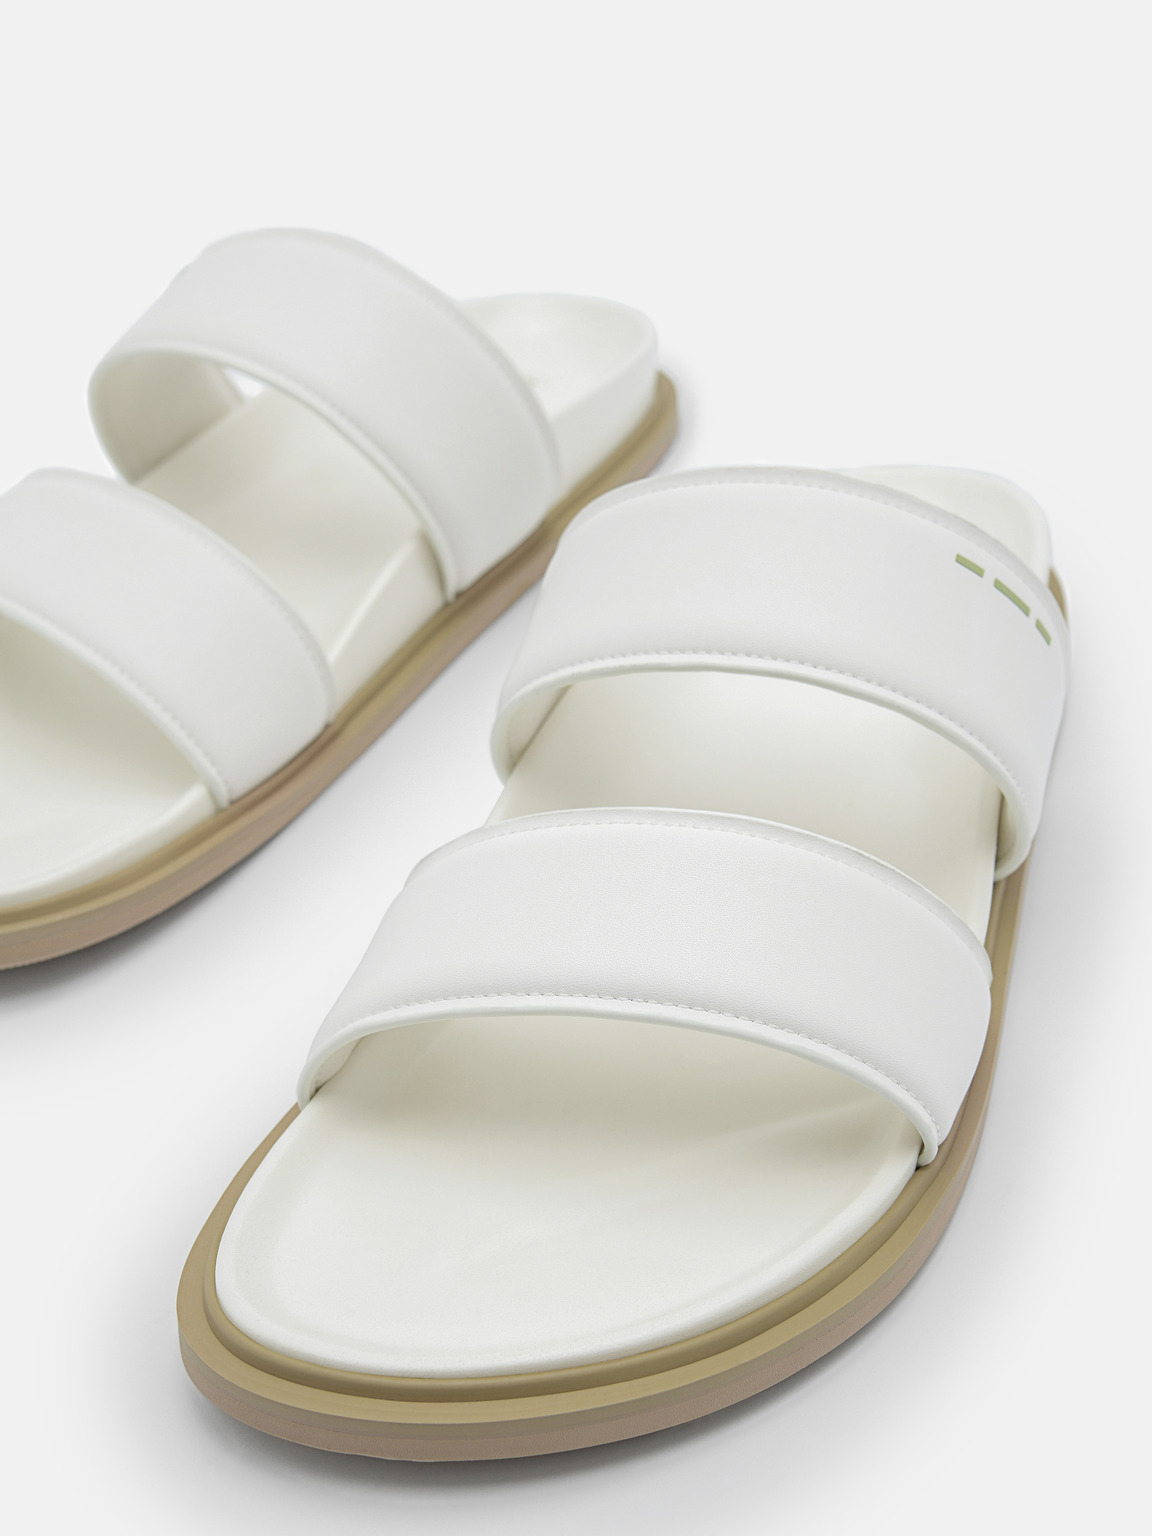 Men's rePEDRO Recycled Leather Slide Sandals, White